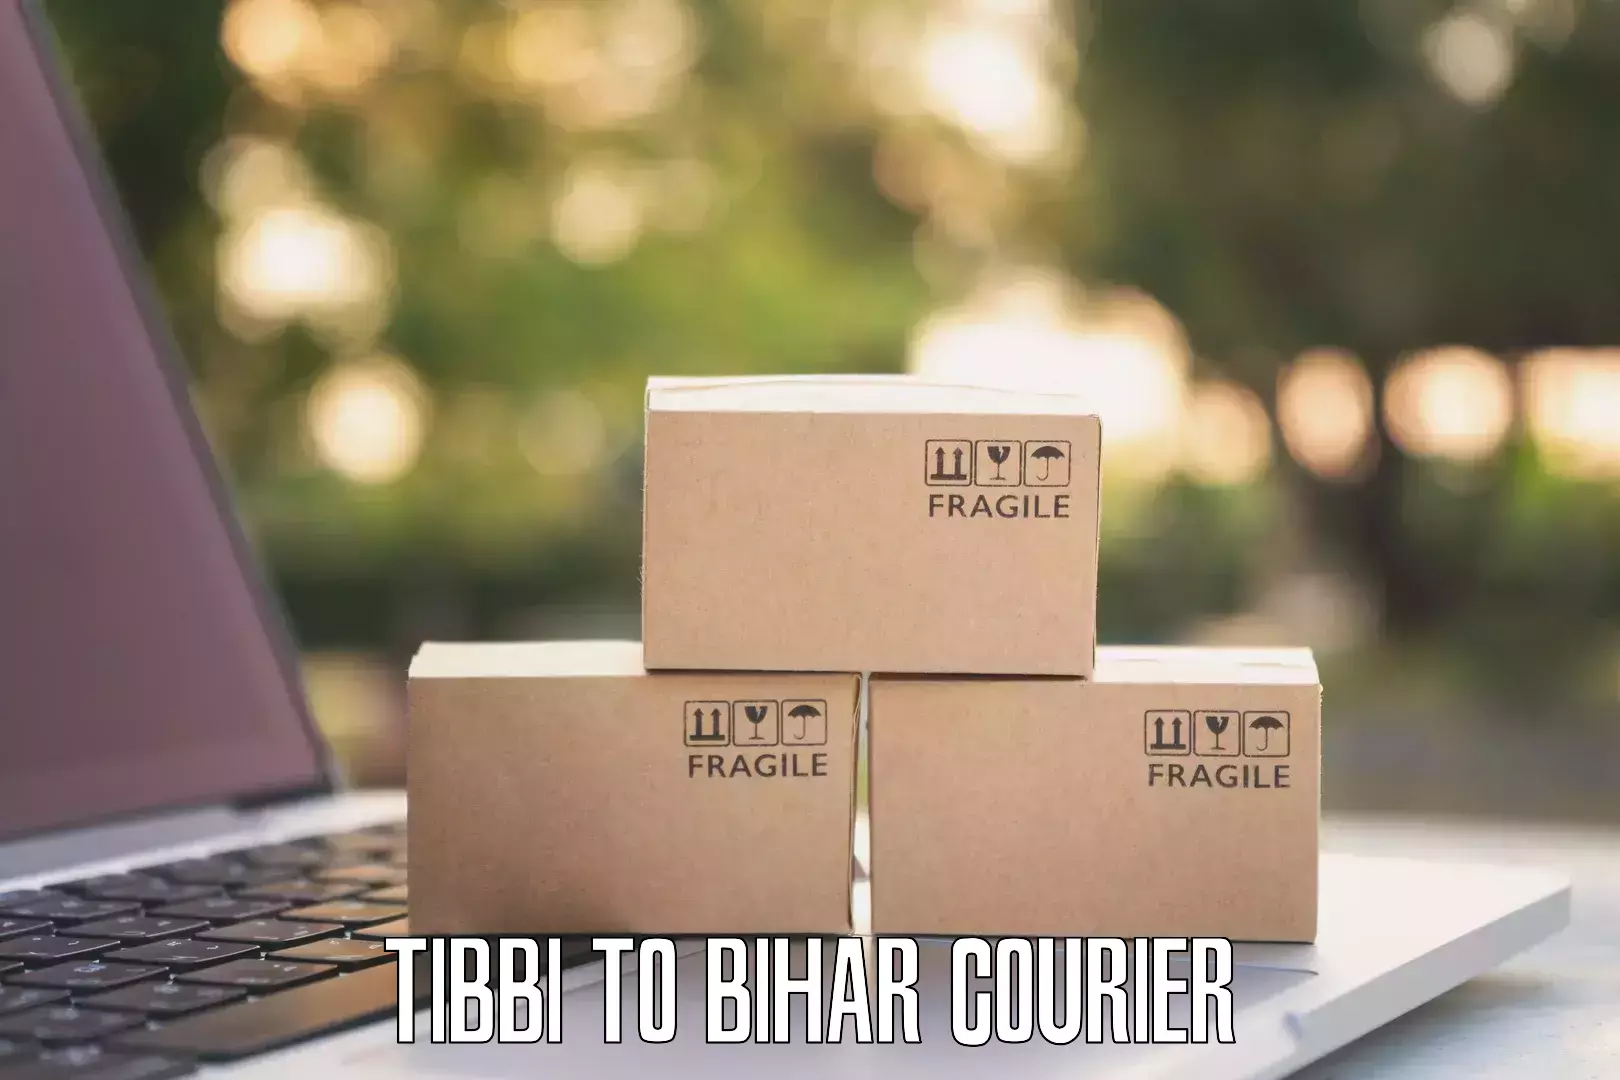 Easy access courier services Tibbi to Fatwah